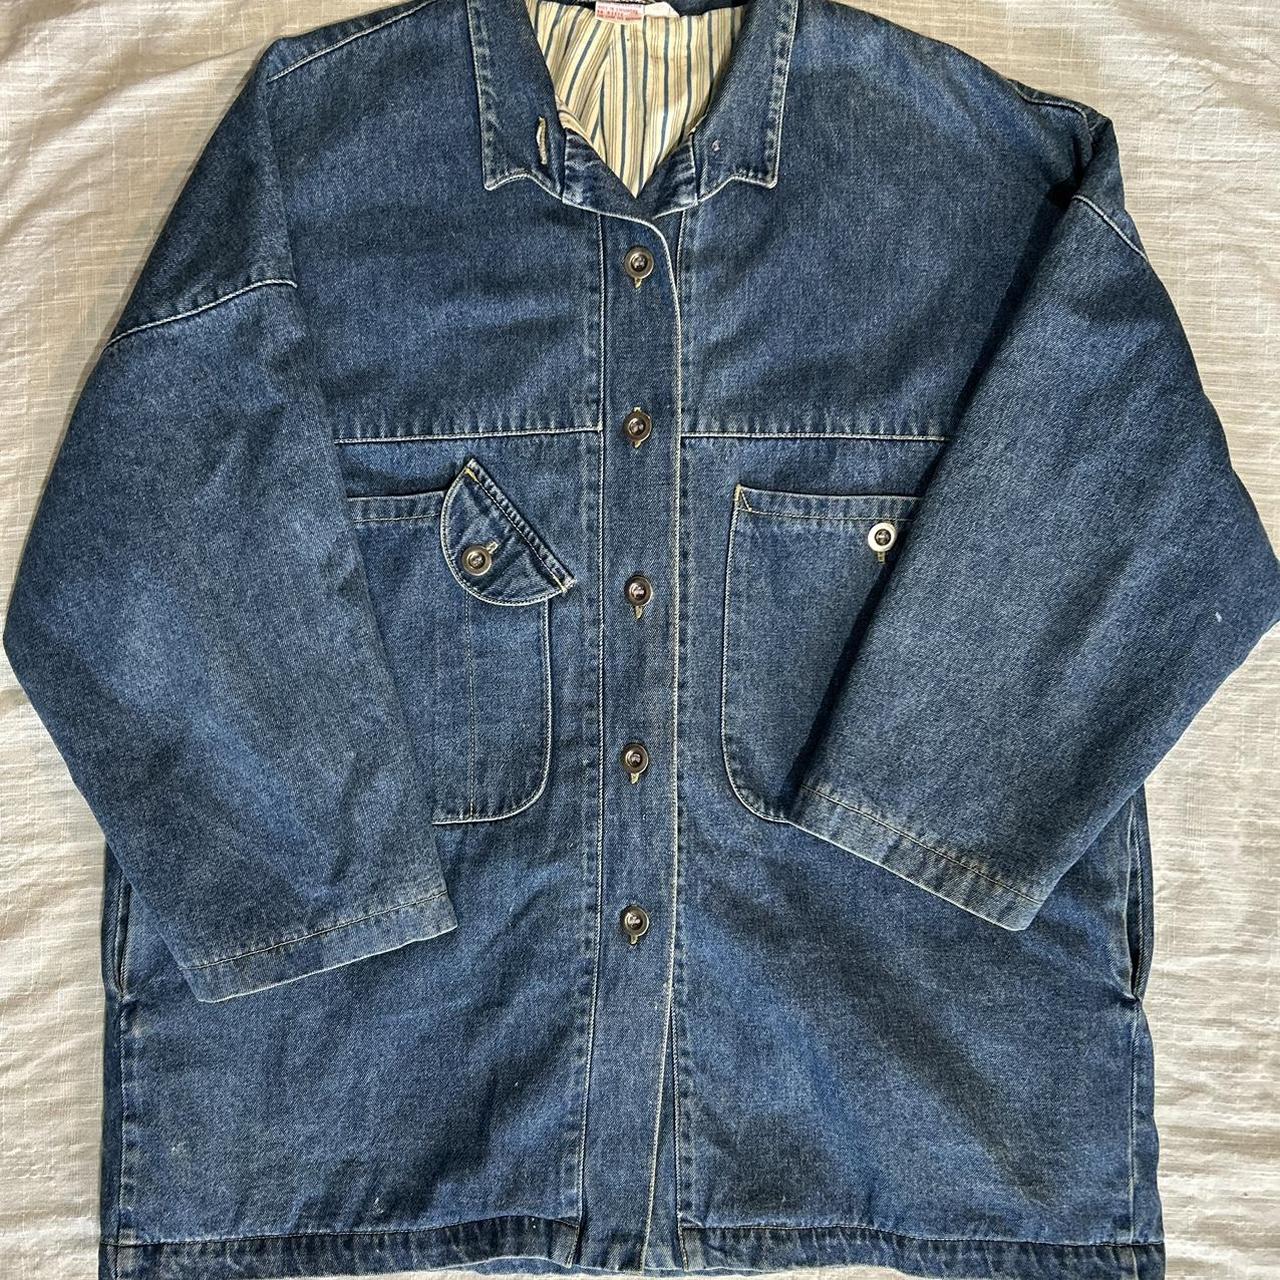 VTG Denim Chore Coat Seriously the most perfect... - Depop